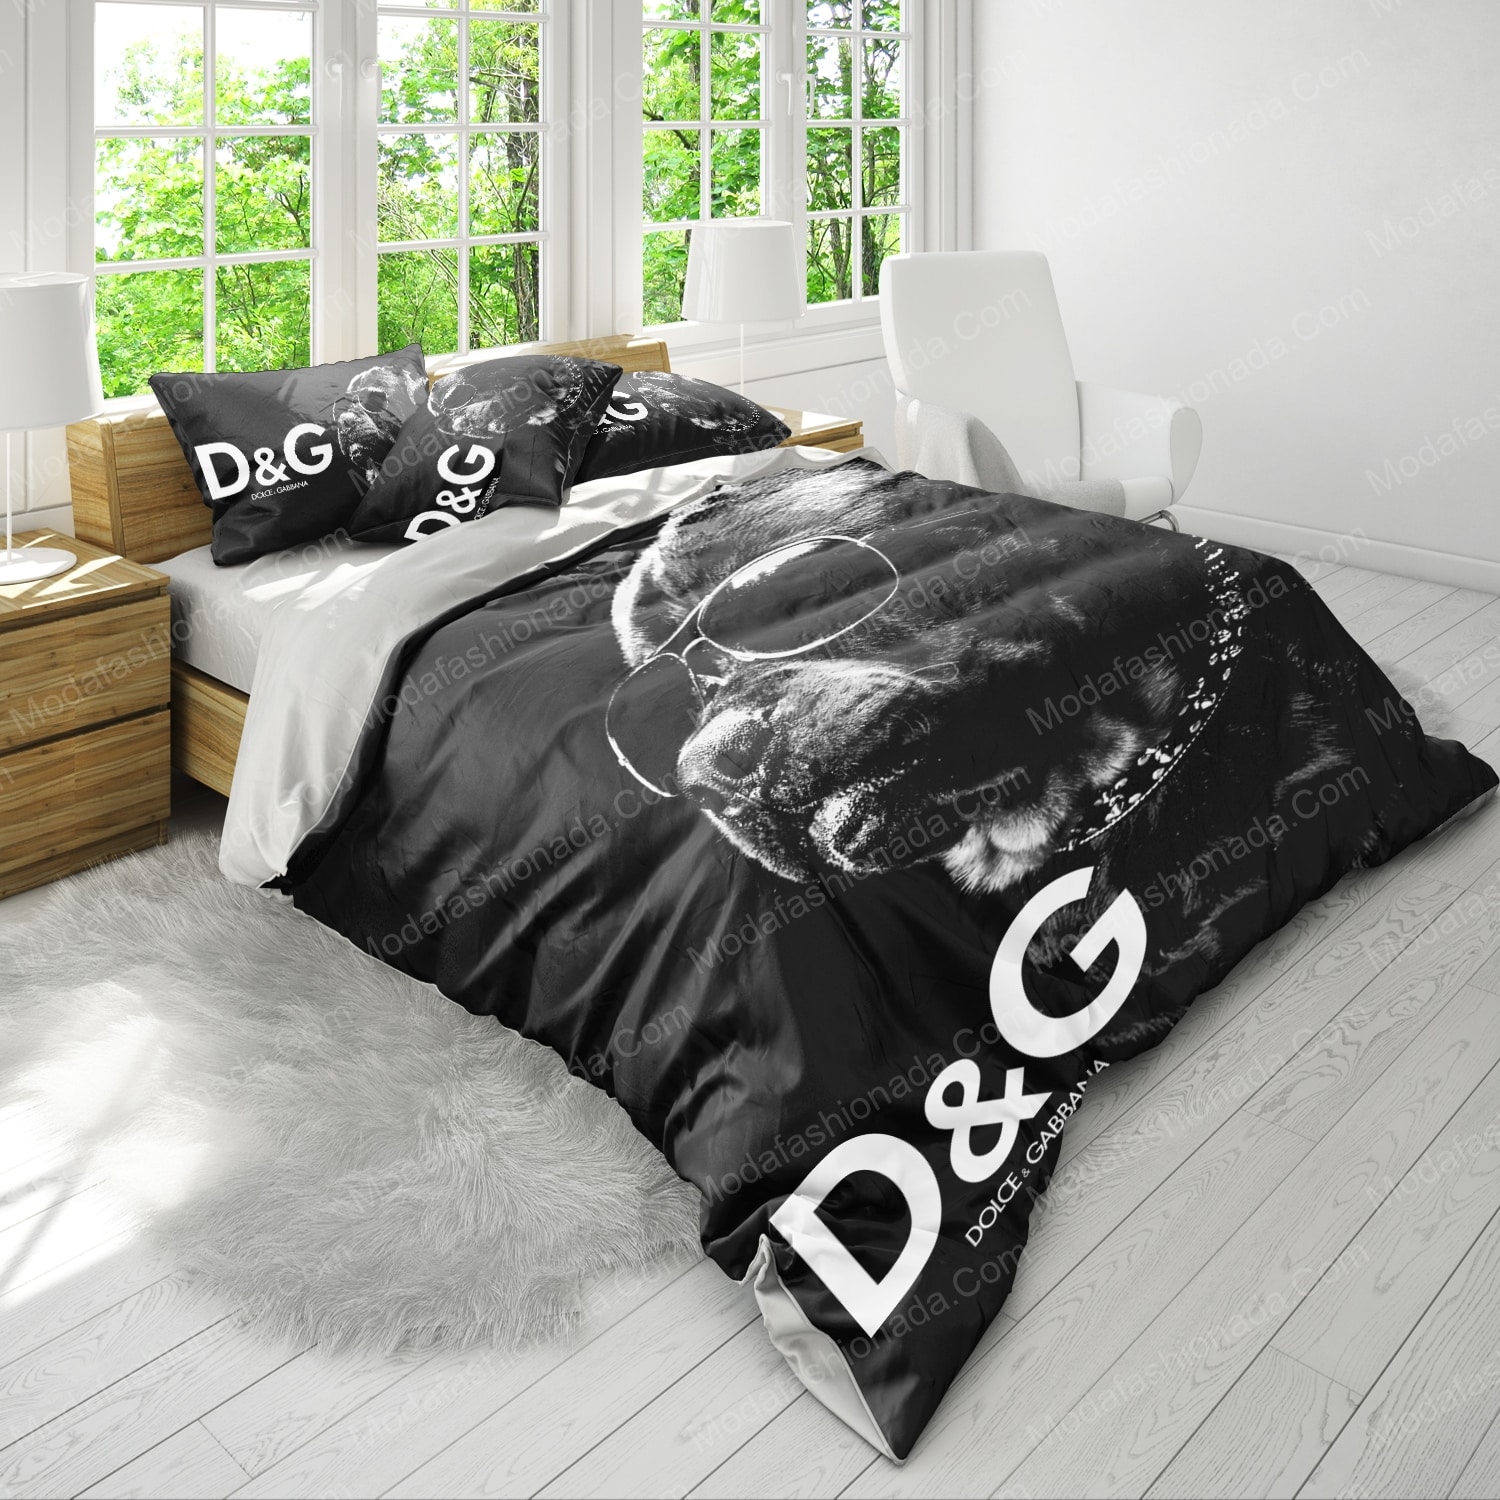 Buy Rotweller Dolce & Gabbana Bedding Sets Bed Sets With Twin, Full ...